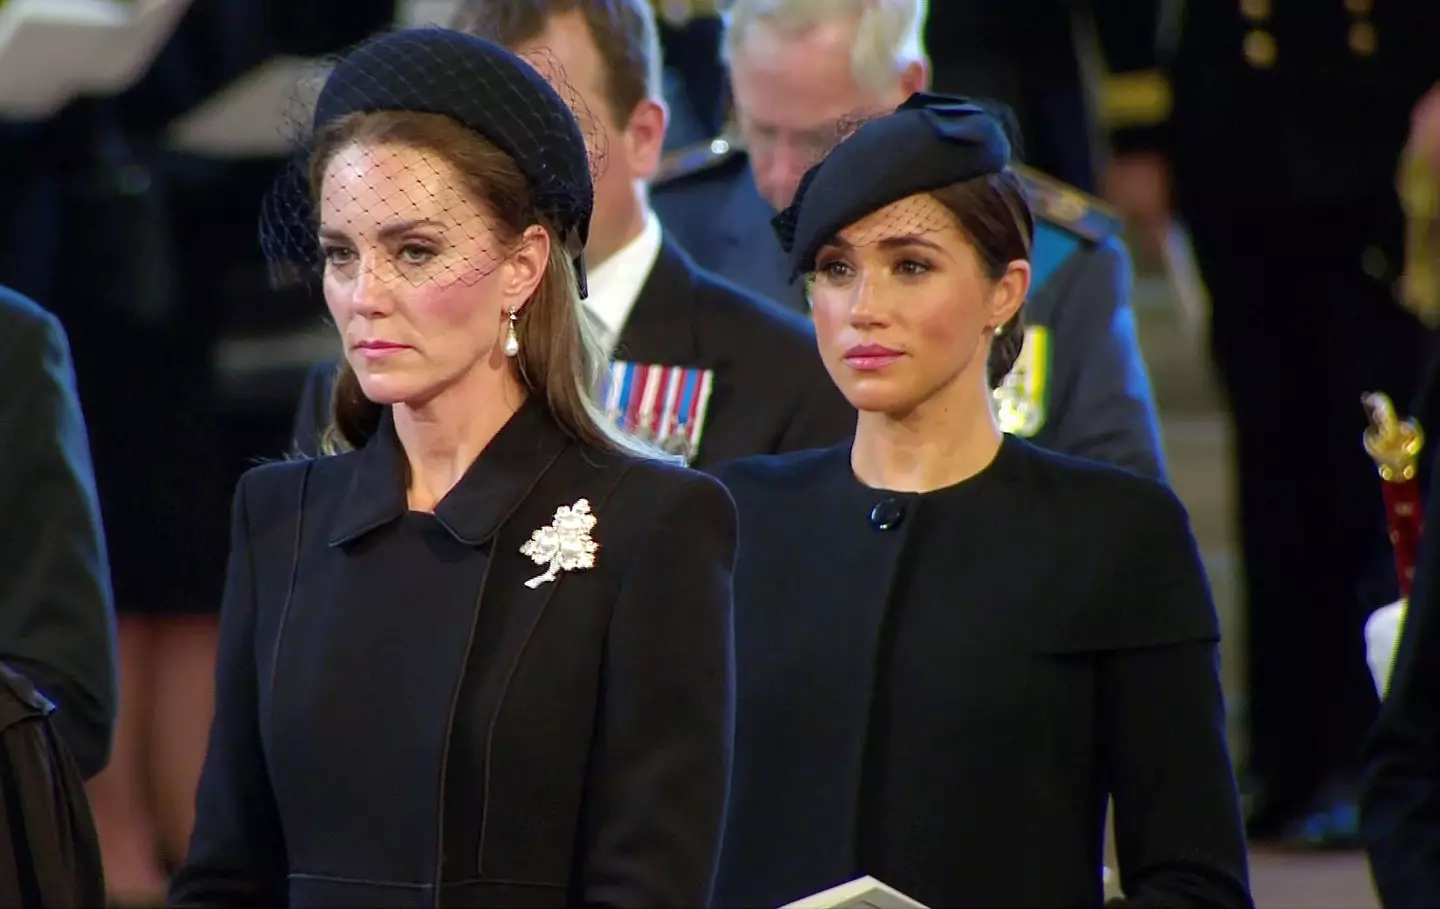 Meghan Markle and Prince Harry have remained in the UK for the funeral proceedings.